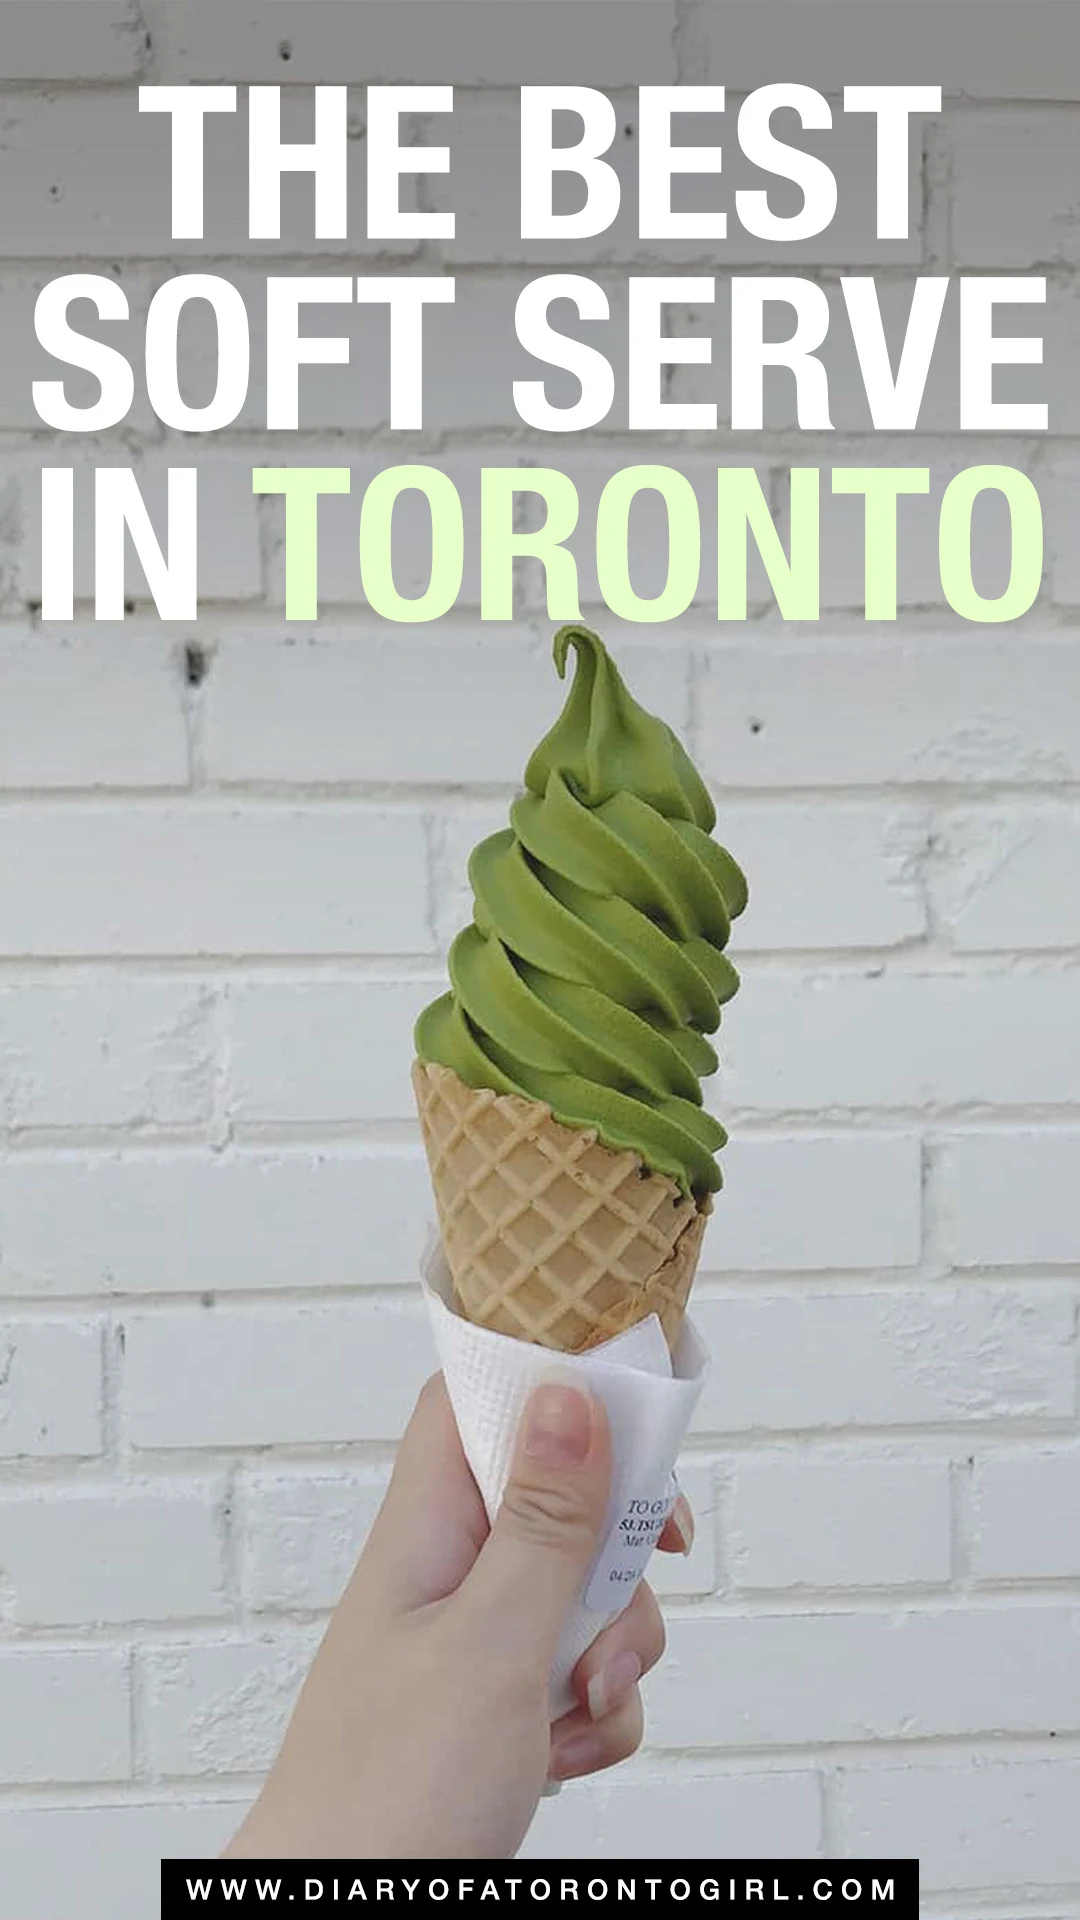 The best spots to grab soft serve ice cream in Toronto, from unique Asian-inspired flavours to decked out ice cream cones!